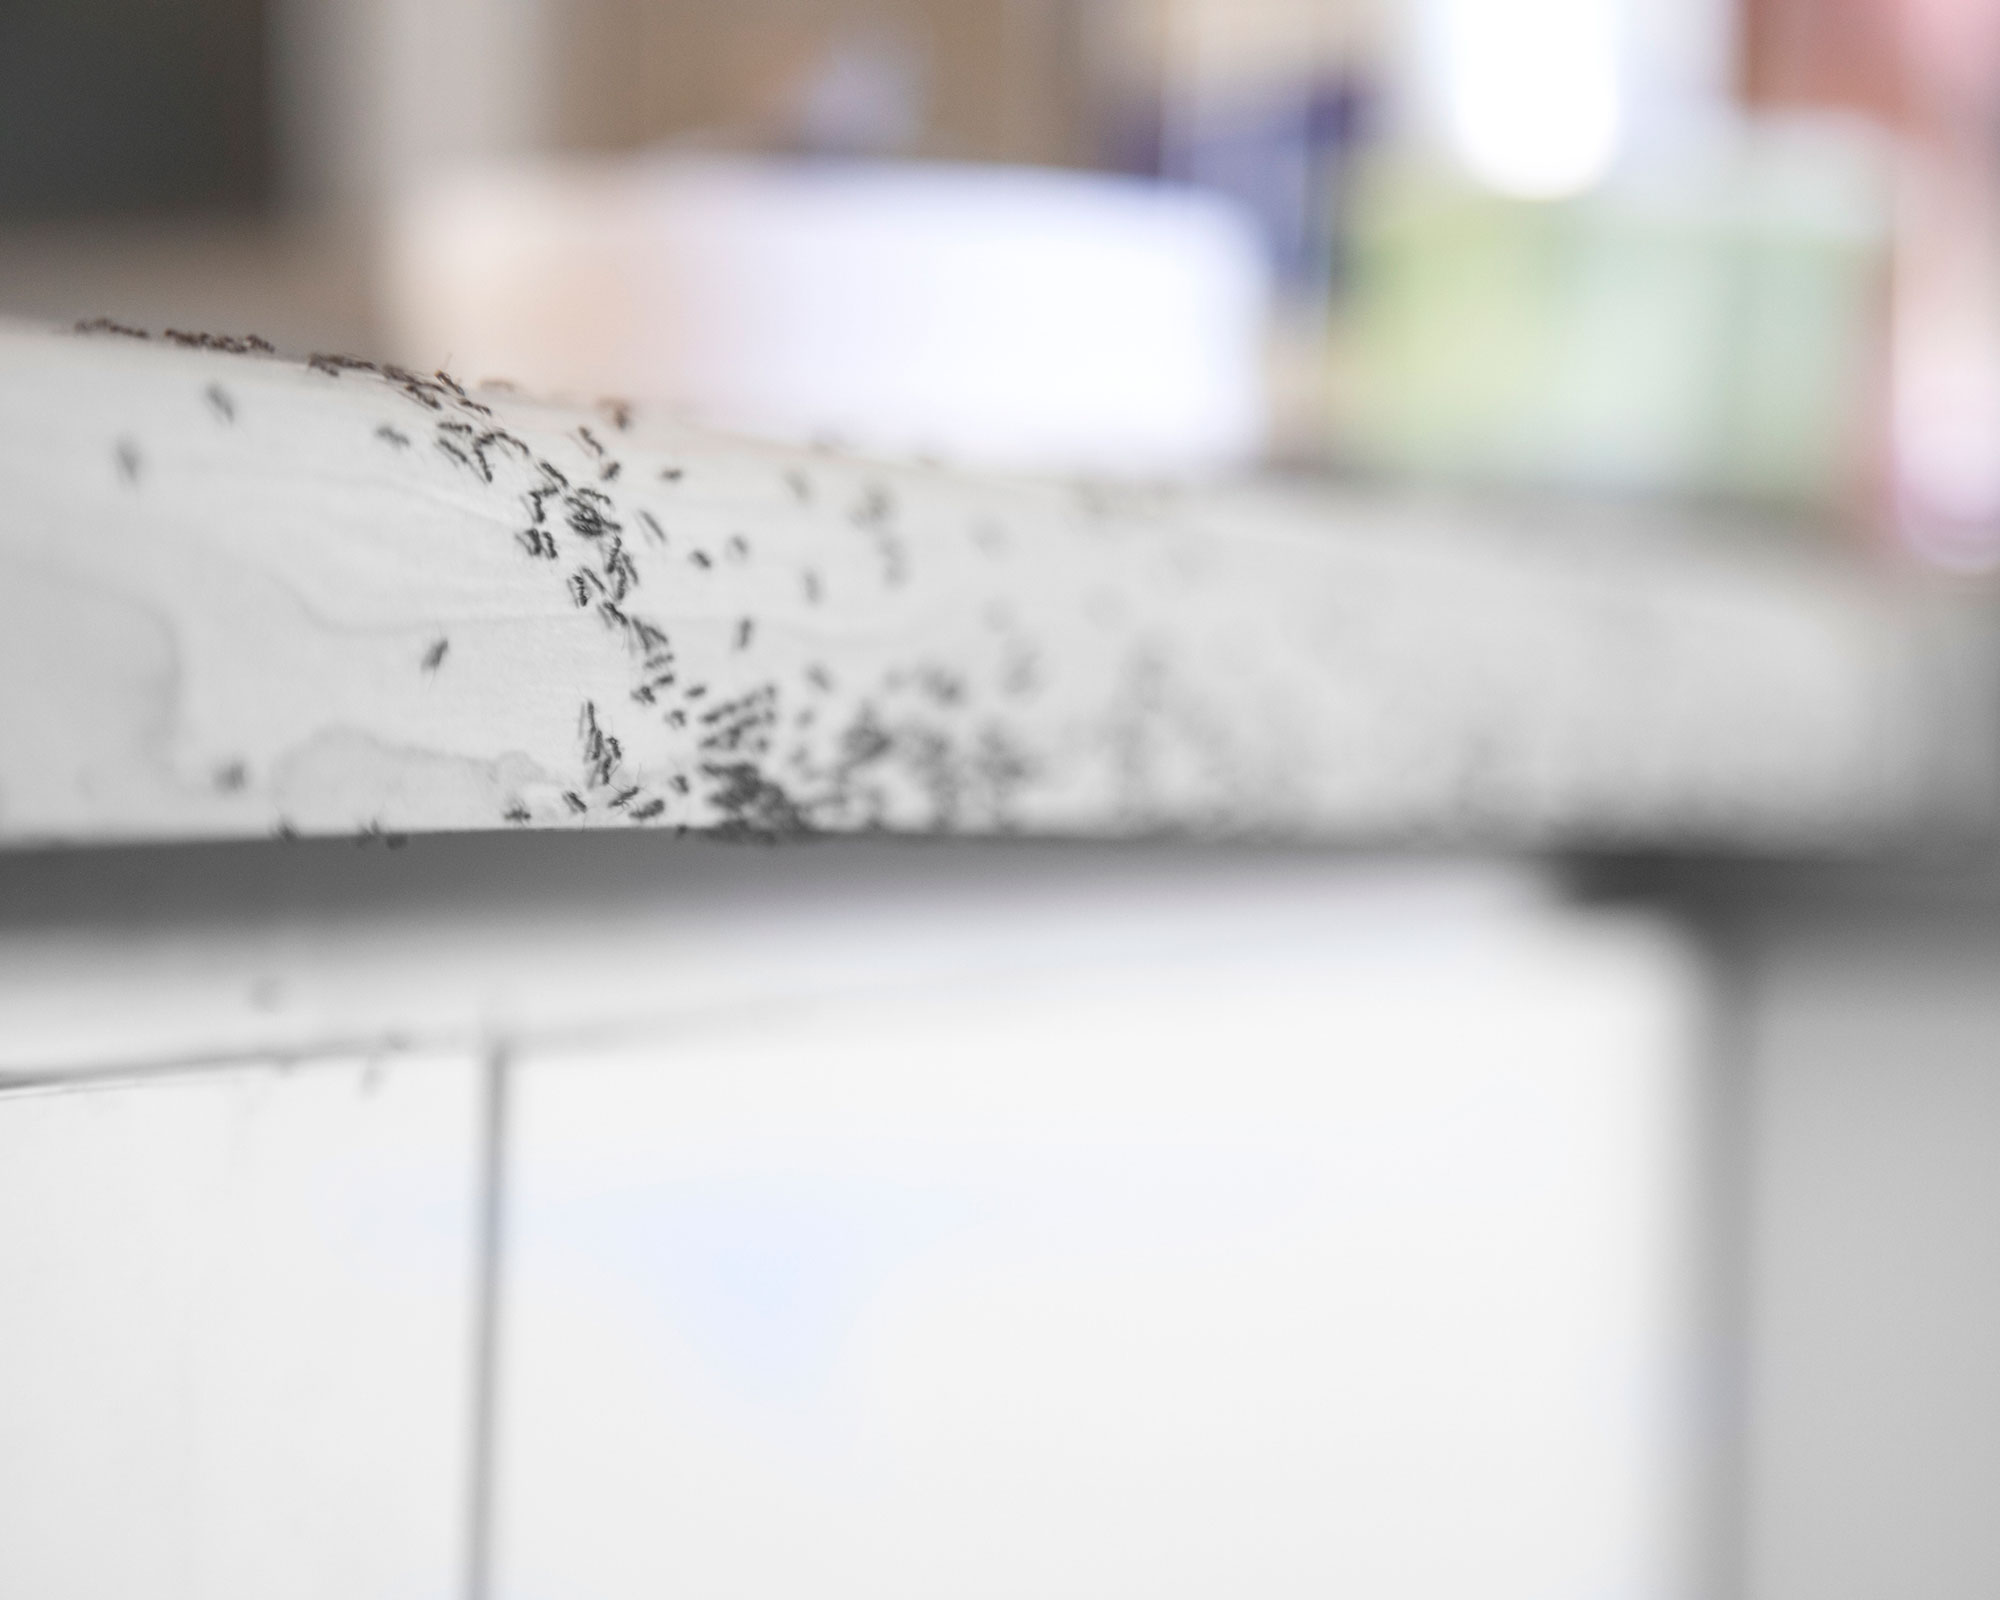 How to get rid of ants - ants on kitchen worktop - GettyImages-1217118154